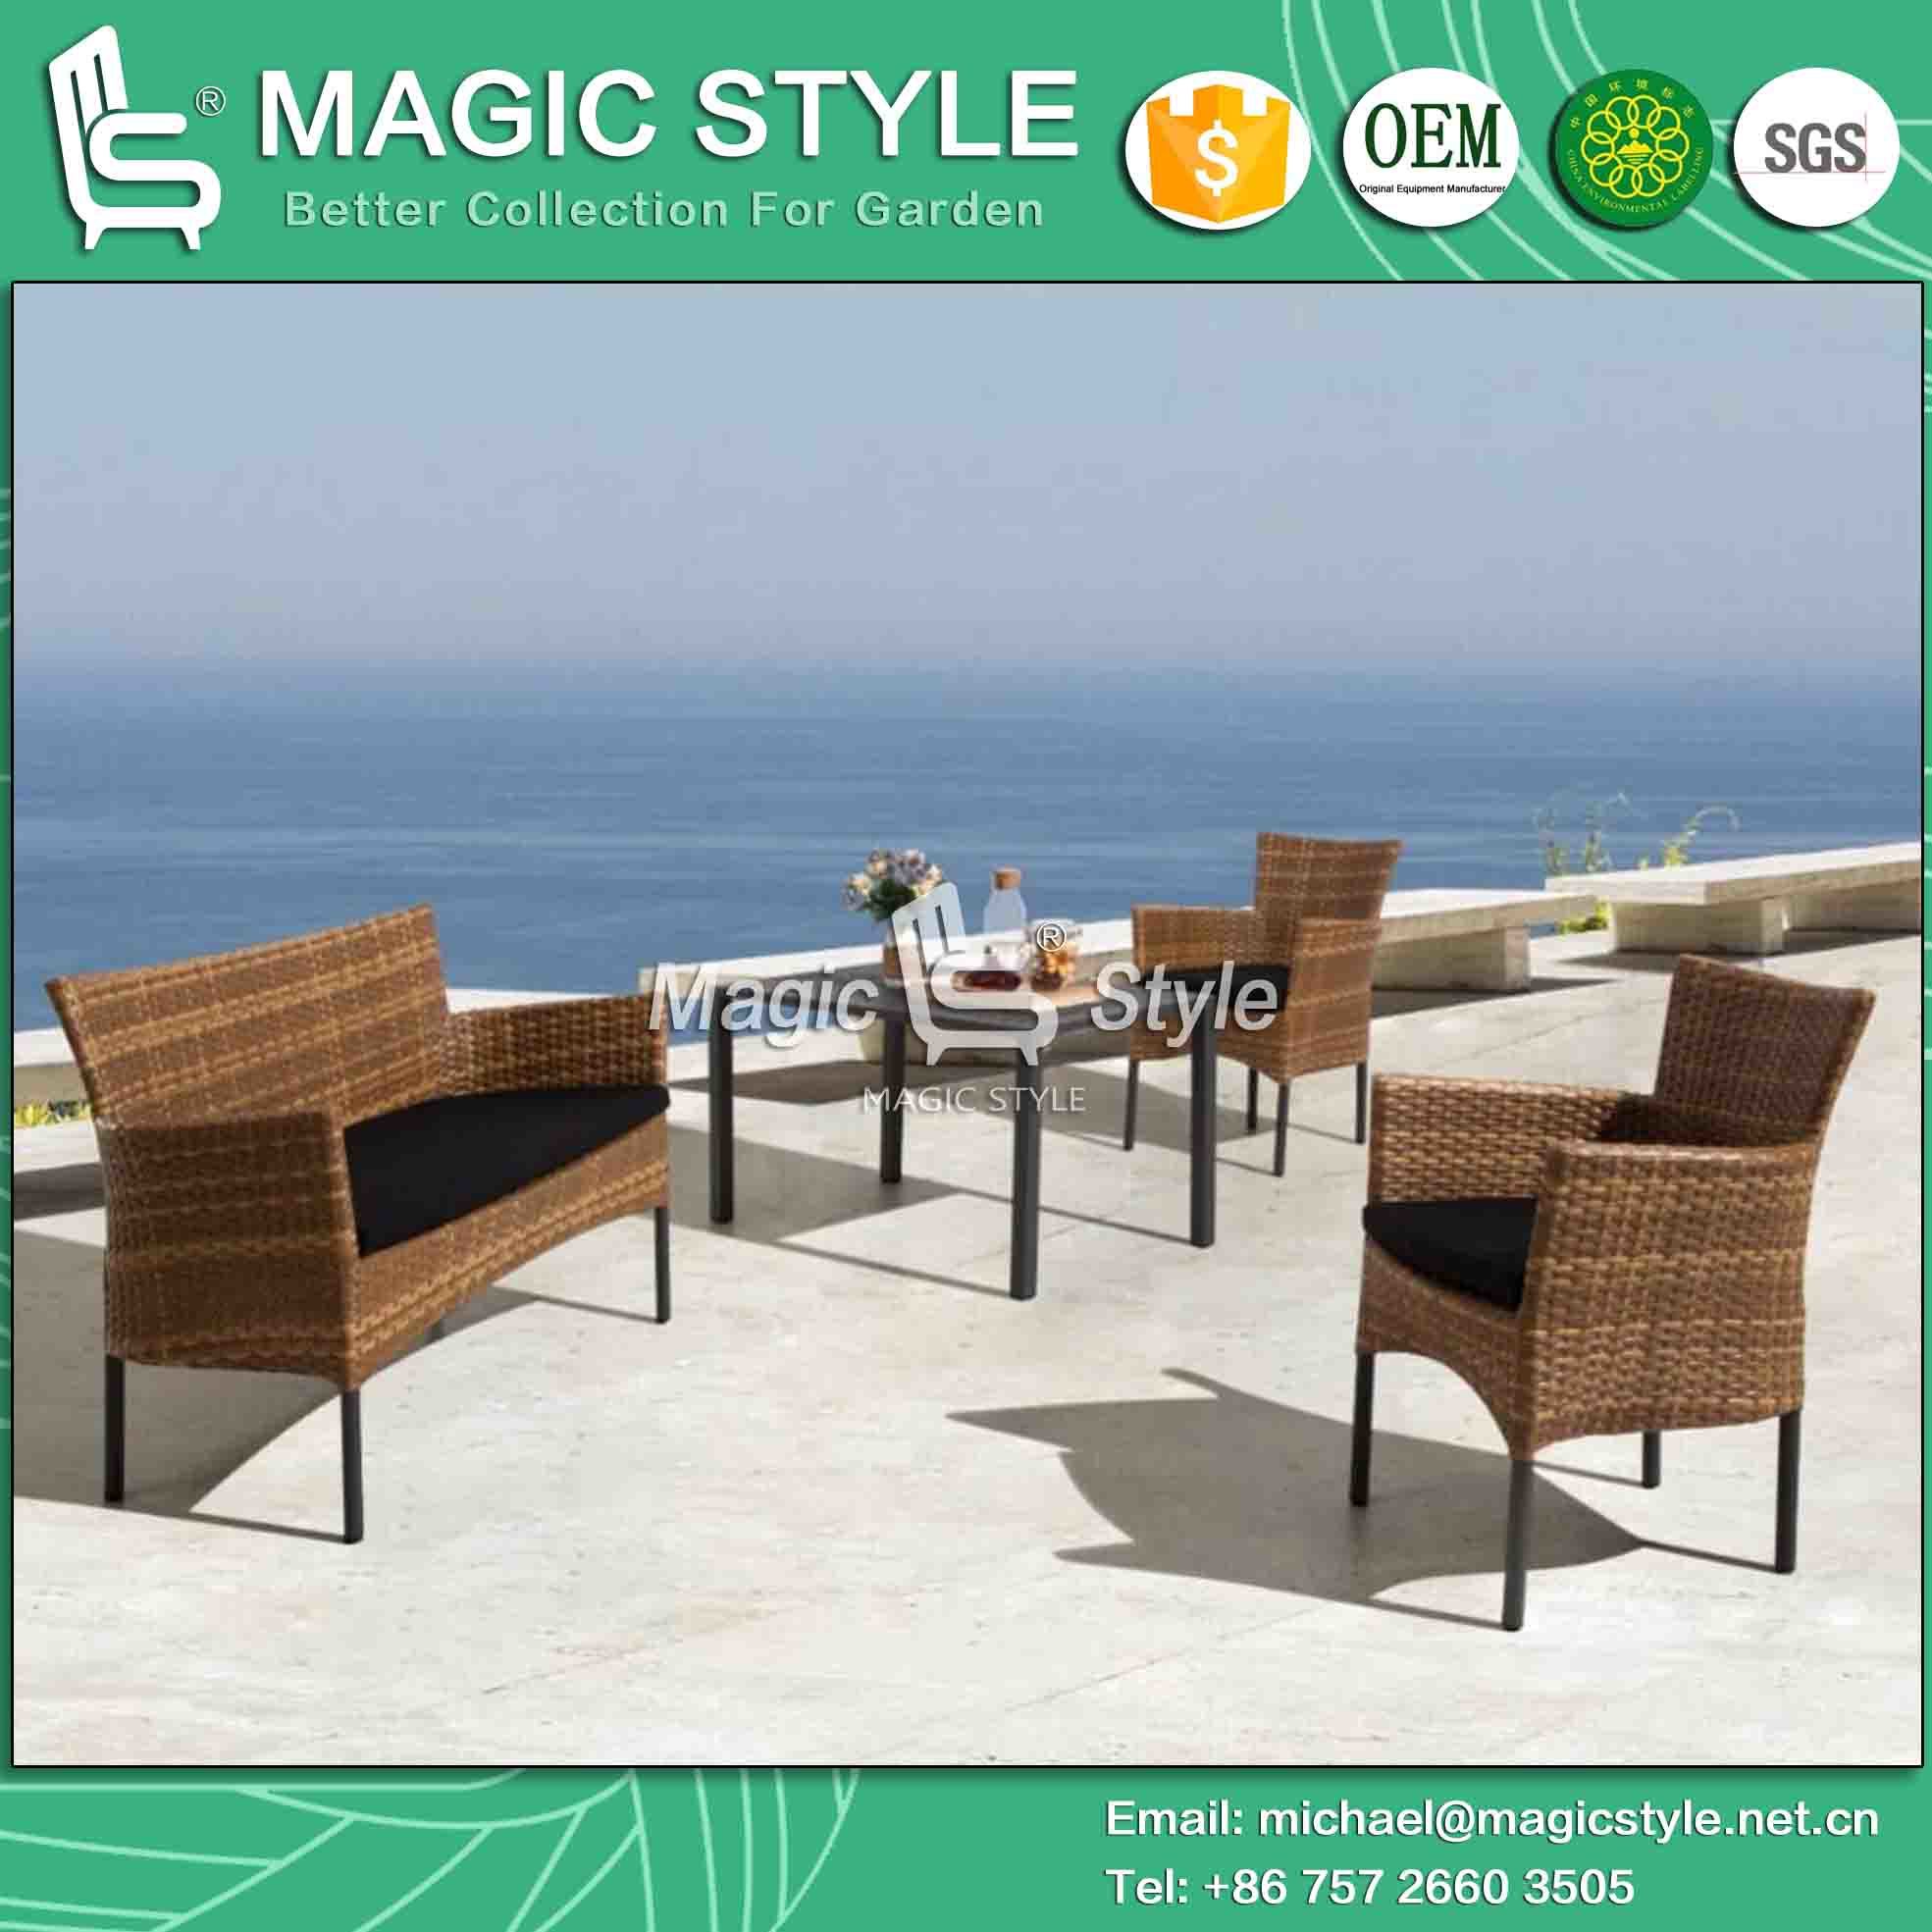 Outdoor Wicker Chair with Cushion Stackable Rattan Chair Garden Dining Chair Patio Wicker Chair Wicker 2-Seat Chair Coffee Table